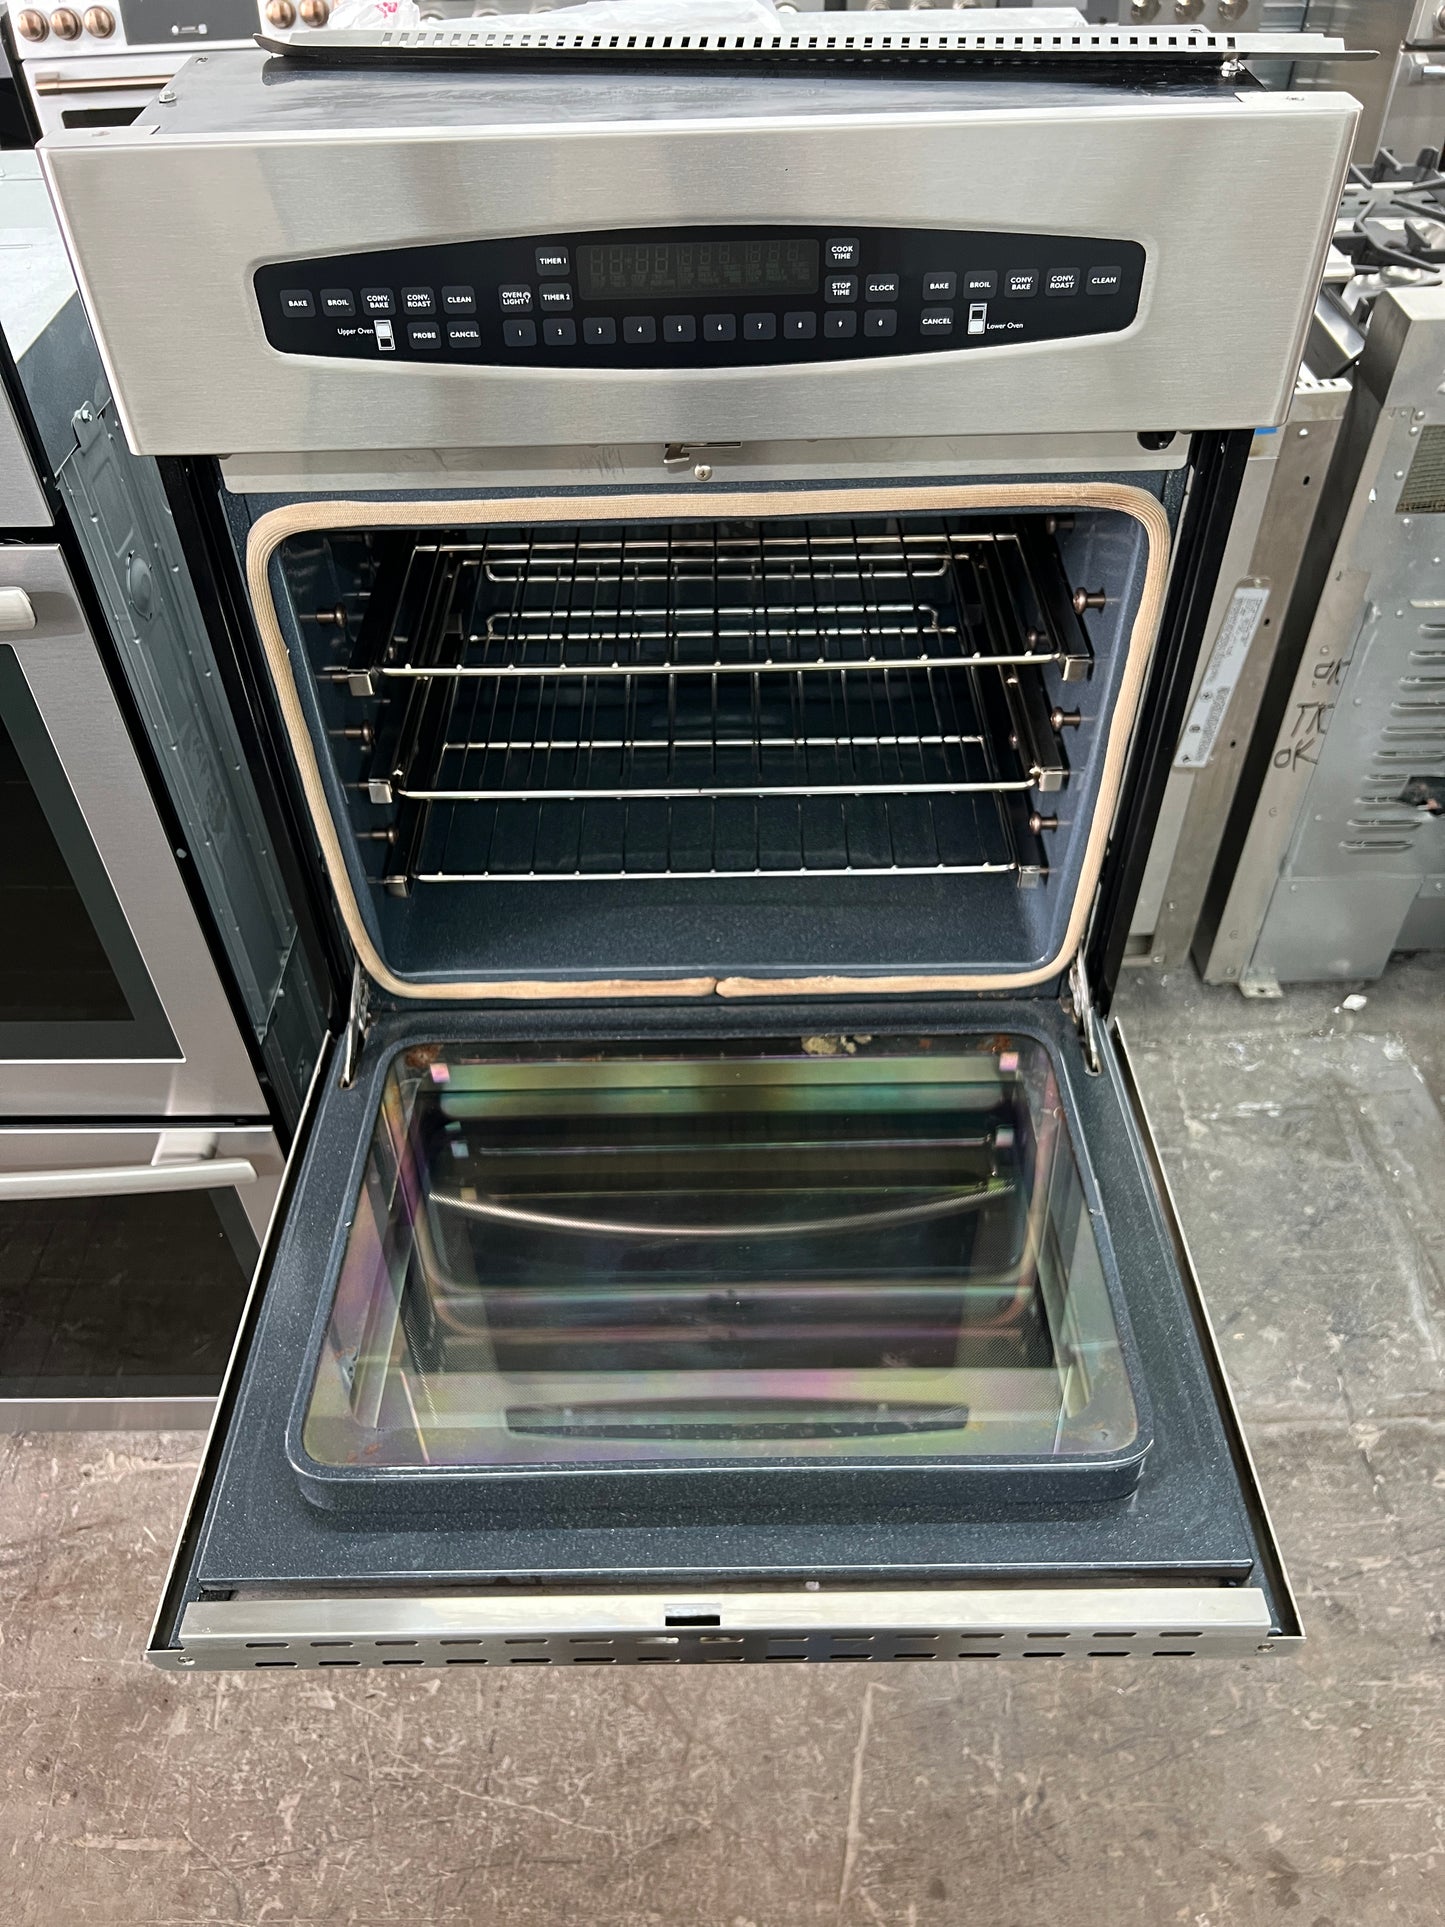 DCS  WOS227SS 27 Inch Double Electric Wall Oven with Self-Cleaning Upper Convection Oven & Hidden Bake Elements in Lower Oven: Stainless Steel, 369313